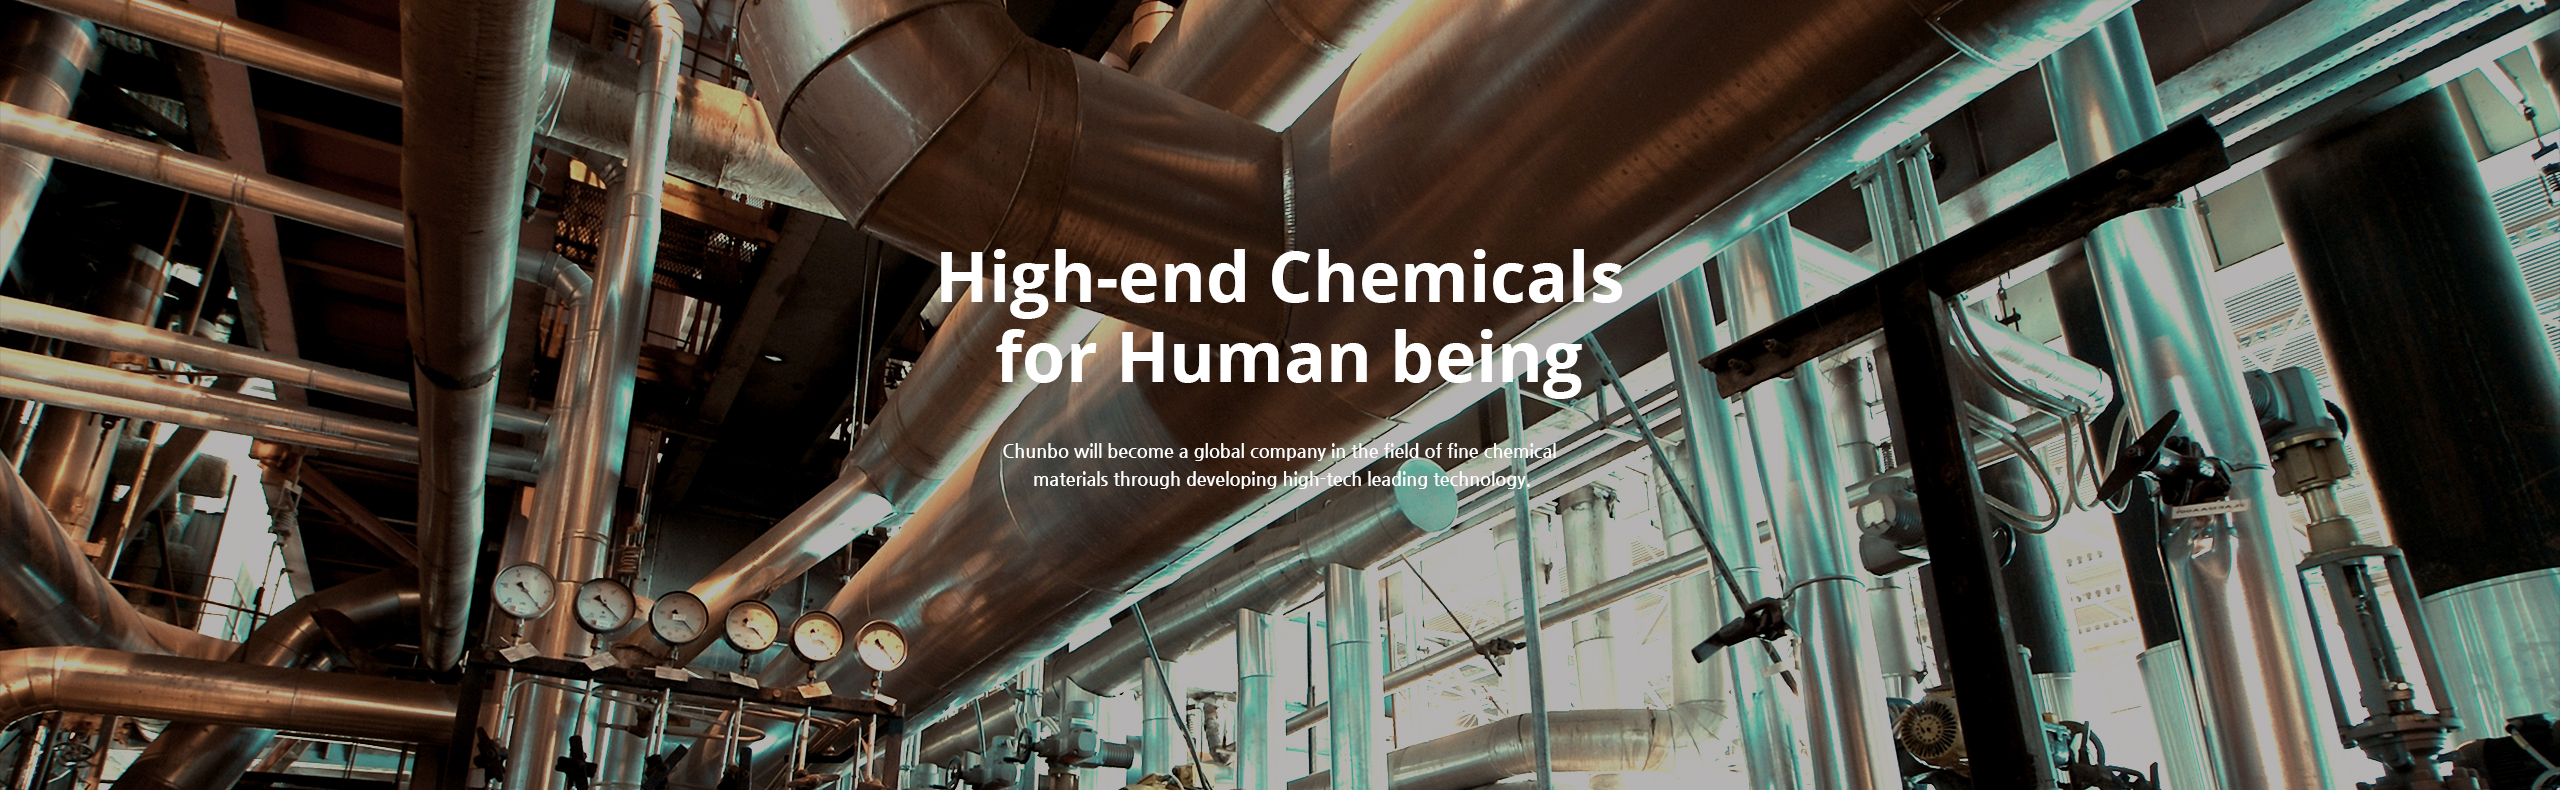 High-end Chemicals  for Human being